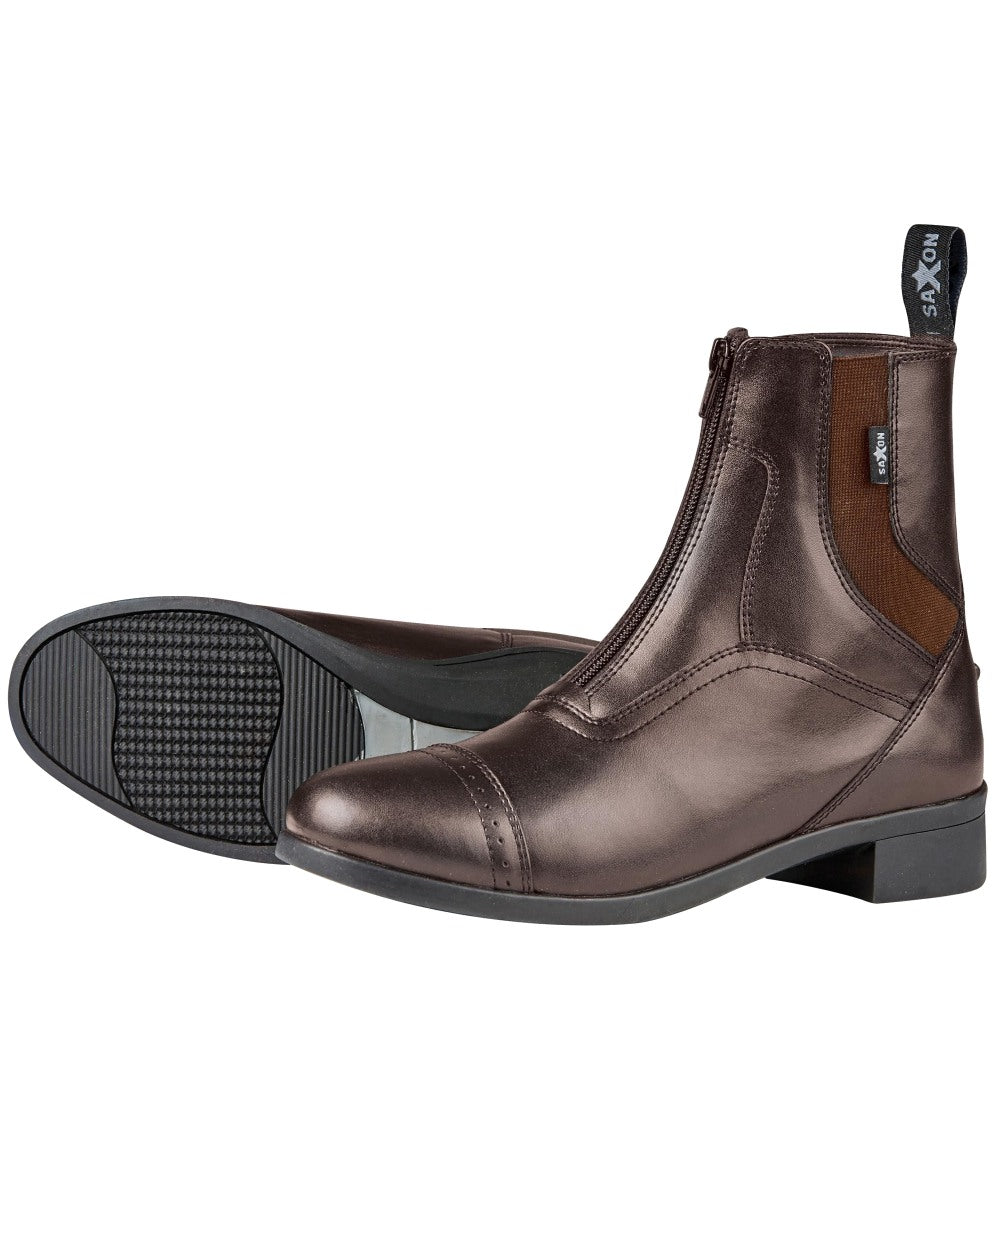 Saxon Womens Syntovia Zip Paddock Boots in Brown 